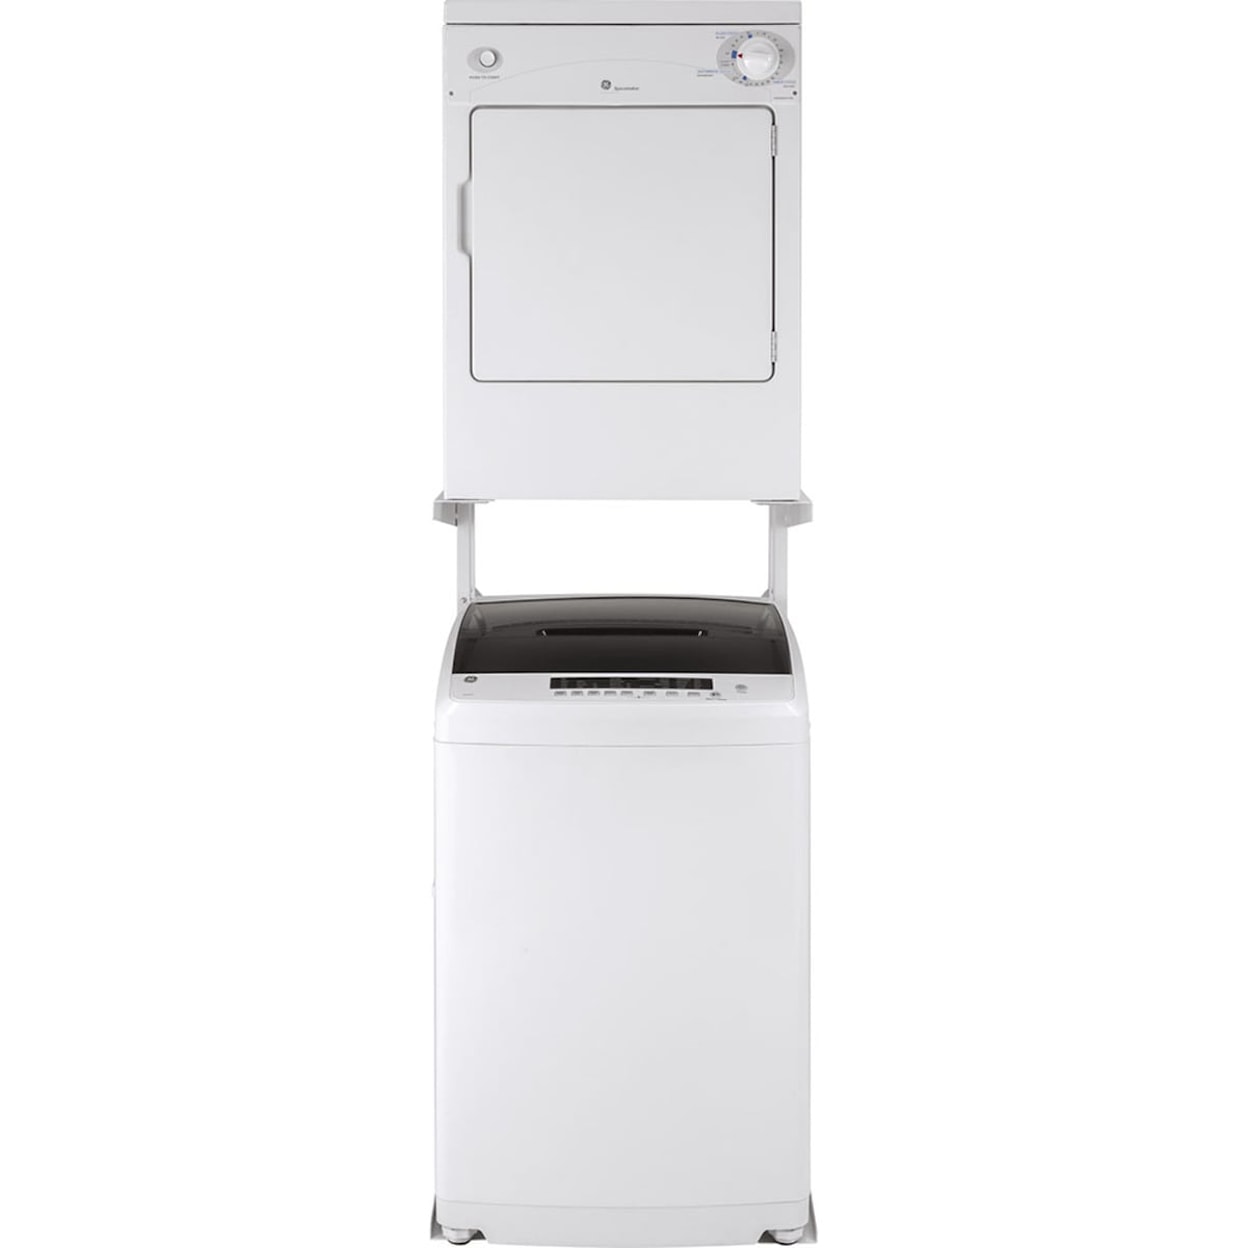 GE Appliances Washers (Canada) Portable Washer